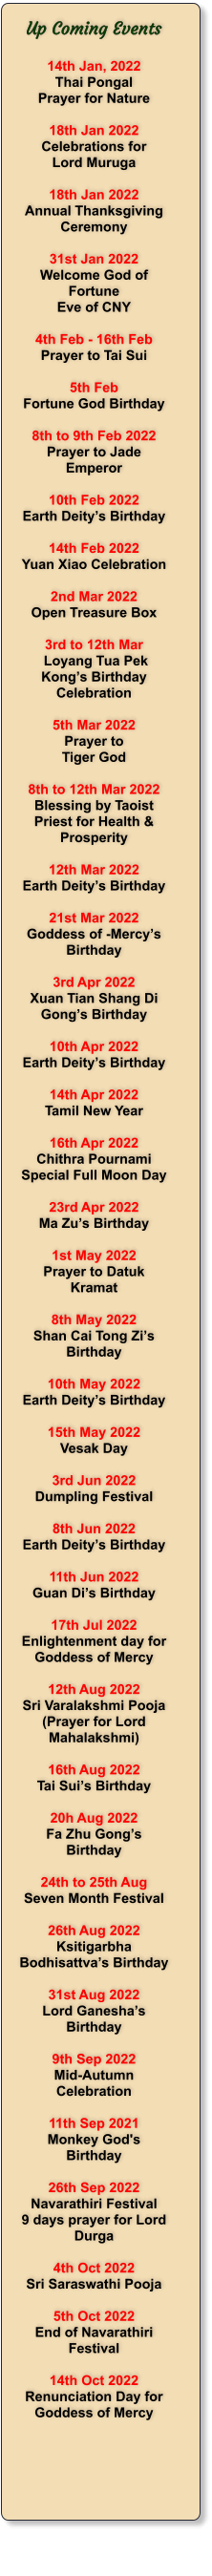 Up Coming Events  14th Jan, 2022 Thai Pongal Prayer for Nature  18th Jan 2022 Celebrations for Lord Muruga  18th Jan 2022 Annual Thanksgiving Ceremony  31st Jan 2022 Welcome God of Fortune  Eve of CNY   4th Feb - 16th Feb Prayer to Tai Sui  5th Feb Fortune God Birthday  8th to 9th Feb 2022 Prayer to Jade Emperor  10th Feb 2022 Earth Deity’s Birthday  14th Feb 2022 Yuan Xiao Celebration  2nd Mar 2022 Open Treasure Box  3rd to 12th Mar  Loyang Tua Pek Kong’s Birthday Celebration  5th Mar 2022 Prayer to  Tiger God  8th to 12th Mar 2022 Blessing by Taoist Priest for Health & Prosperity  12th Mar 2022  Earth Deity’s Birthday  21st Mar 2022 Goddess of -Mercy’s Birthday  3rd Apr 2022 Xuan Tian Shang Di Gong’s Birthday  10th Apr 2022  Earth Deity’s Birthday  14th Apr 2022 Tamil New Year  16th Apr 2022 Chithra Pournami Special Full Moon Day  23rd Apr 2022 Ma Zu’s Birthday  1st May 2022 Prayer to Datuk Kramat  8th May 2022 Shan Cai Tong Zi’s Birthday  10th May 2022 Earth Deity’s Birthday  15th May 2022 Vesak Day  3rd Jun 2022 Dumpling Festival  8th Jun 2022 Earth Deity’s Birthday  11th Jun 2022 Guan Di’s Birthday  17th Jul 2022 Enlightenment day for Goddess of Mercy  12th Aug 2022 Sri Varalakshmi Pooja (Prayer for Lord Mahalakshmi)  16th Aug 2022 Tai Sui’s Birthday  20h Aug 2022 Fa Zhu Gong’s Birthday  24th to 25th Aug Seven Month Festival  26th Aug 2022 Ksitigarbha Bodhisattva’s Birthday  31st Aug 2022 Lord Ganesha’s Birthday  9th Sep 2022 Mid-Autumn Celebration  11th Sep 2021 Monkey God's Birthday  26th Sep 2022 Navarathiri Festival 9 days prayer for Lord Durga  4th Oct 2022 Sri Saraswathi Pooja  5th Oct 2022 End of Navarathiri Festival  14th Oct 2022 Renunciation Day for Goddess of Mercy